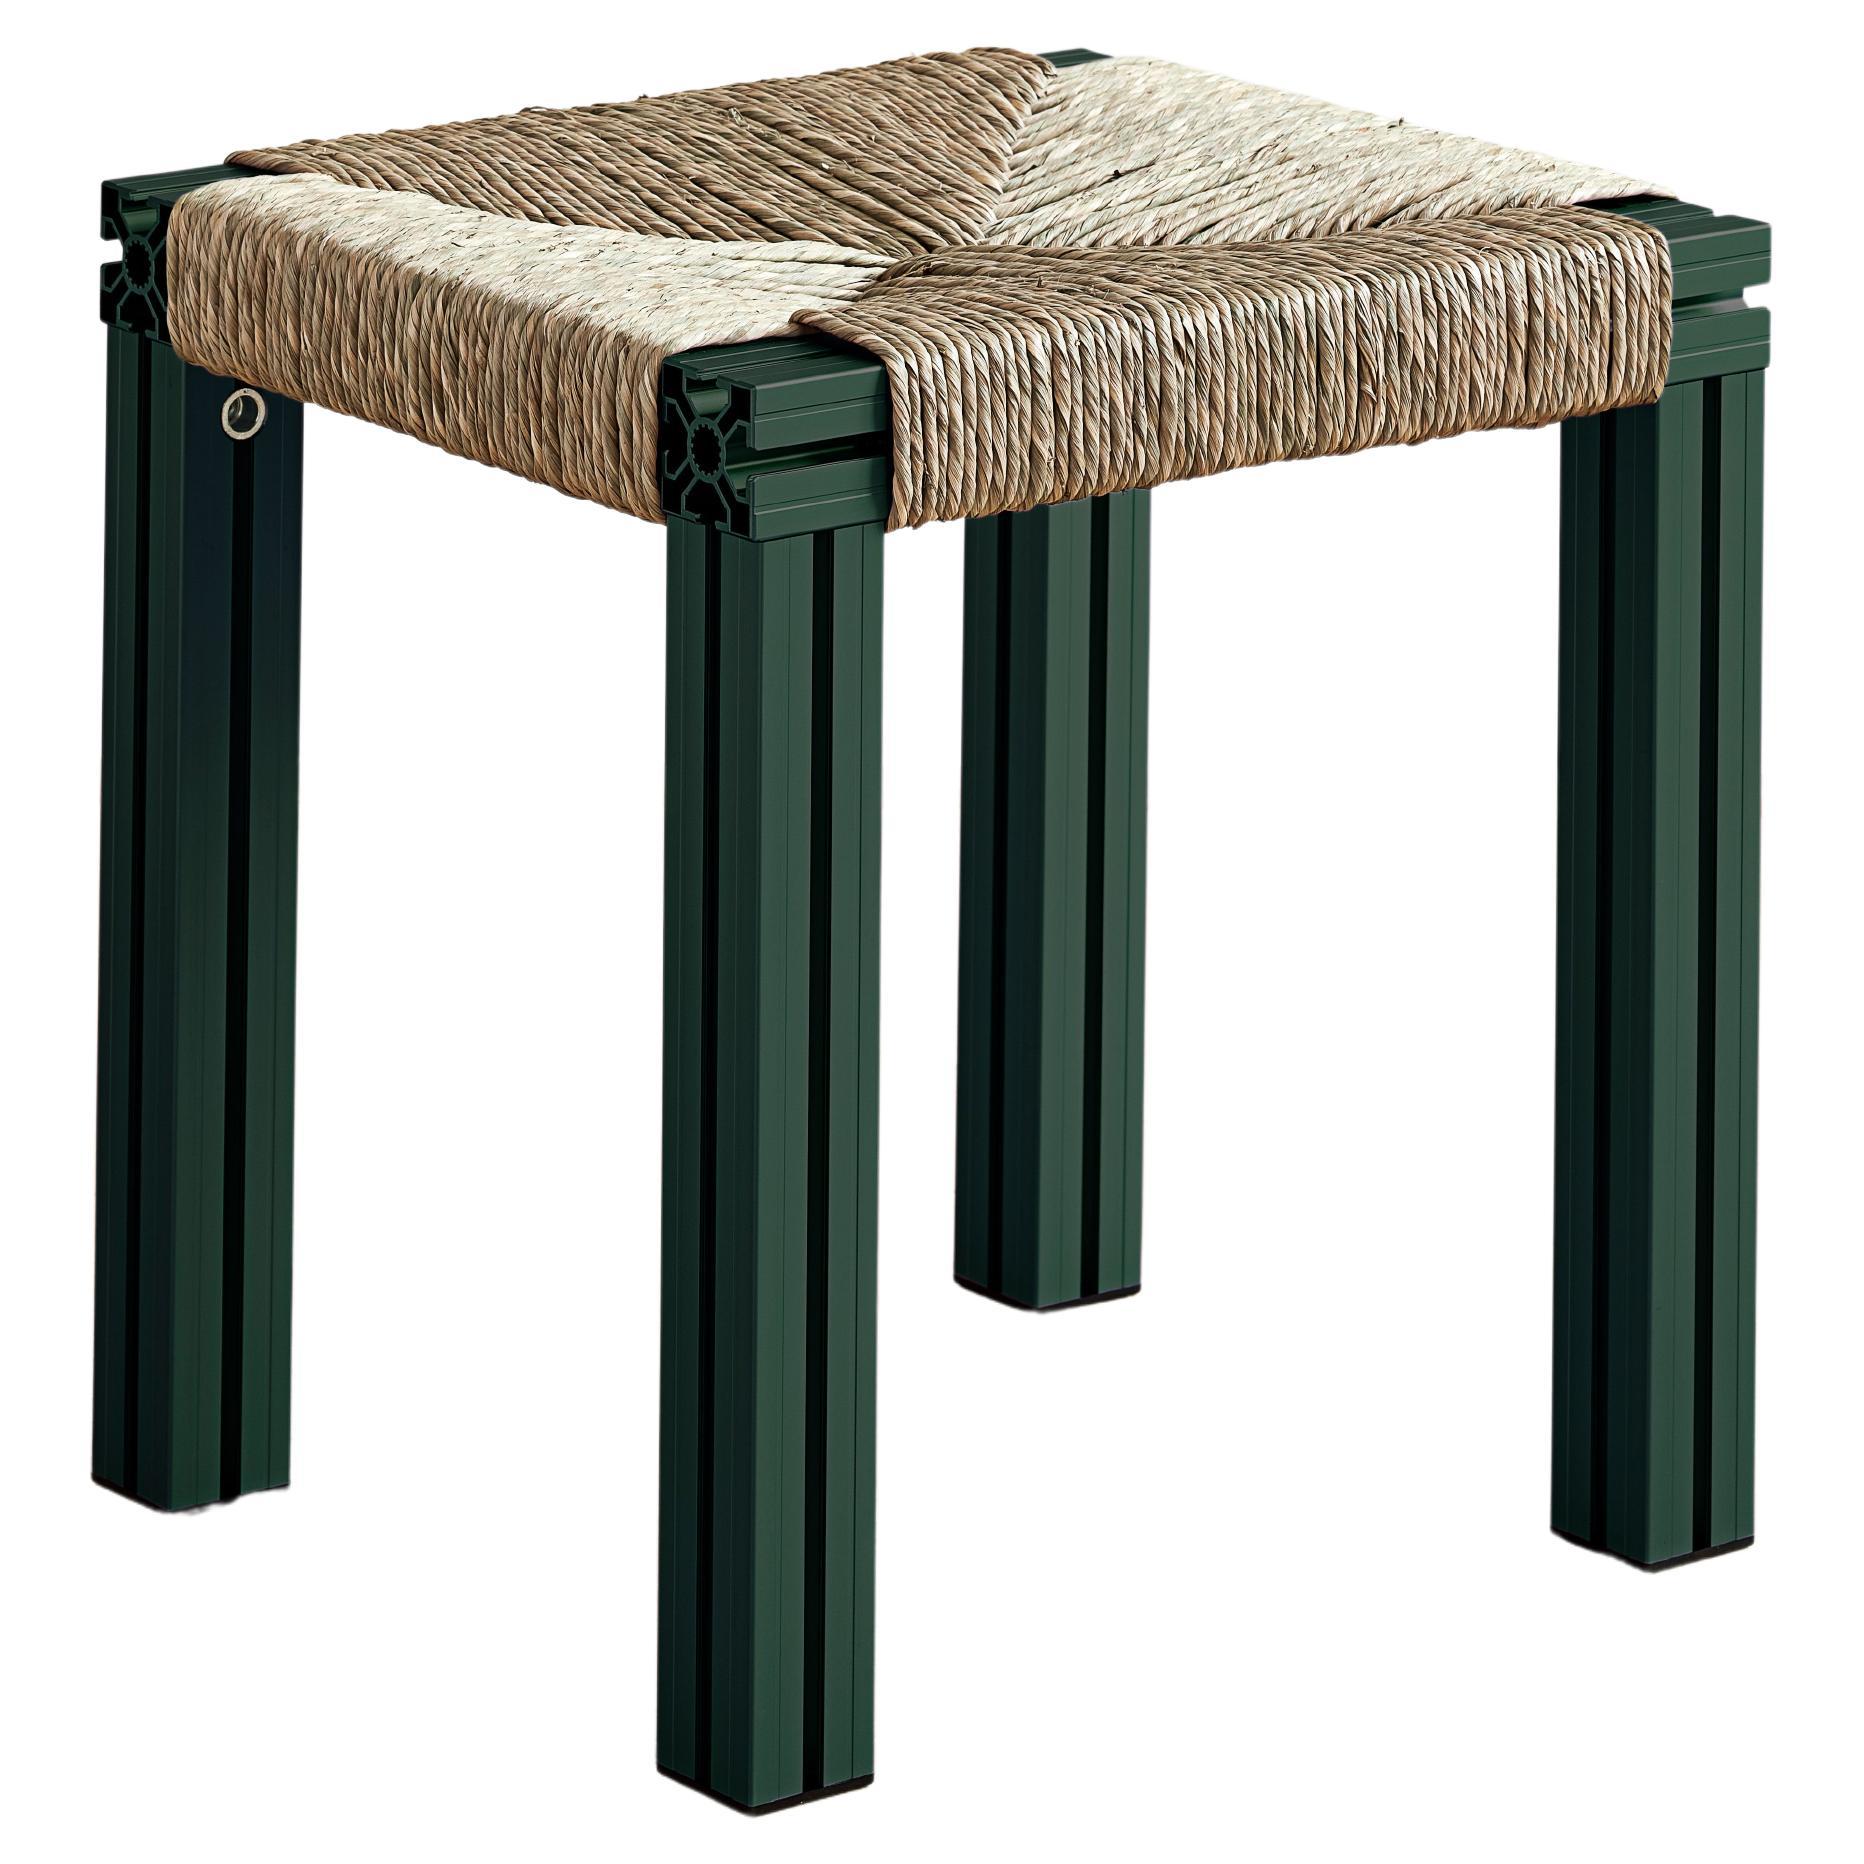 Green Aluminium Stool with Reel Rush Seating from Anodised Wicker Collection For Sale